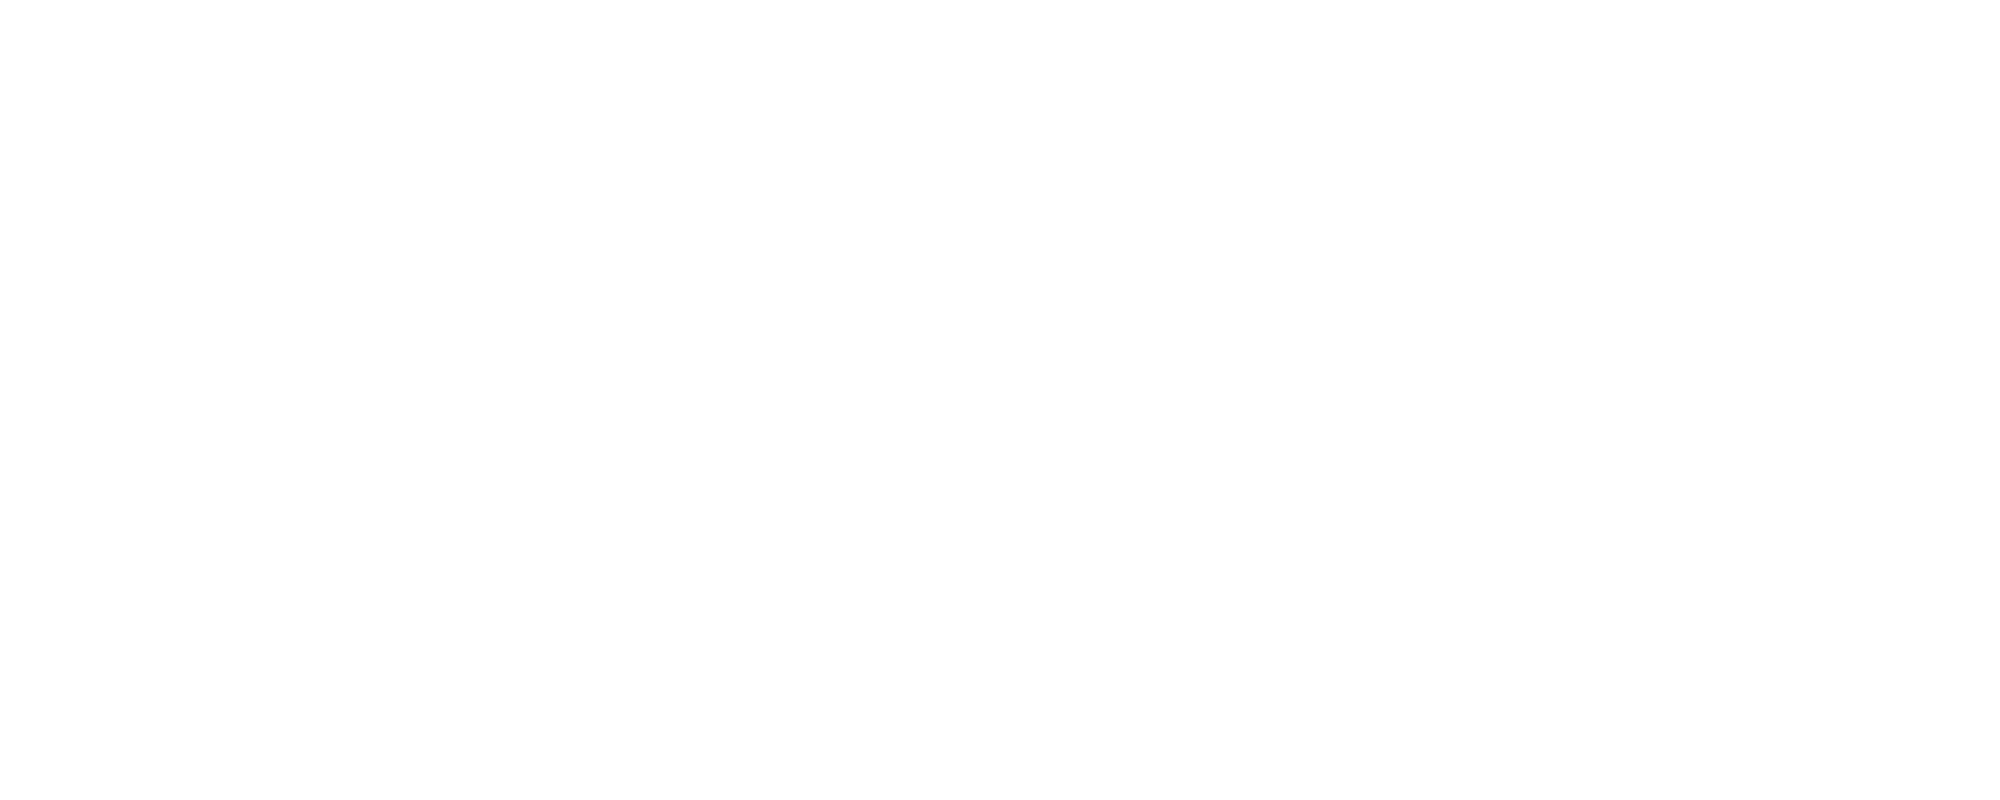 STATEMENT FROM OVATION TV CEO CHARLES SEGARS ON THE PASSAGE OF THE AMERICAN RESCUE PLAN